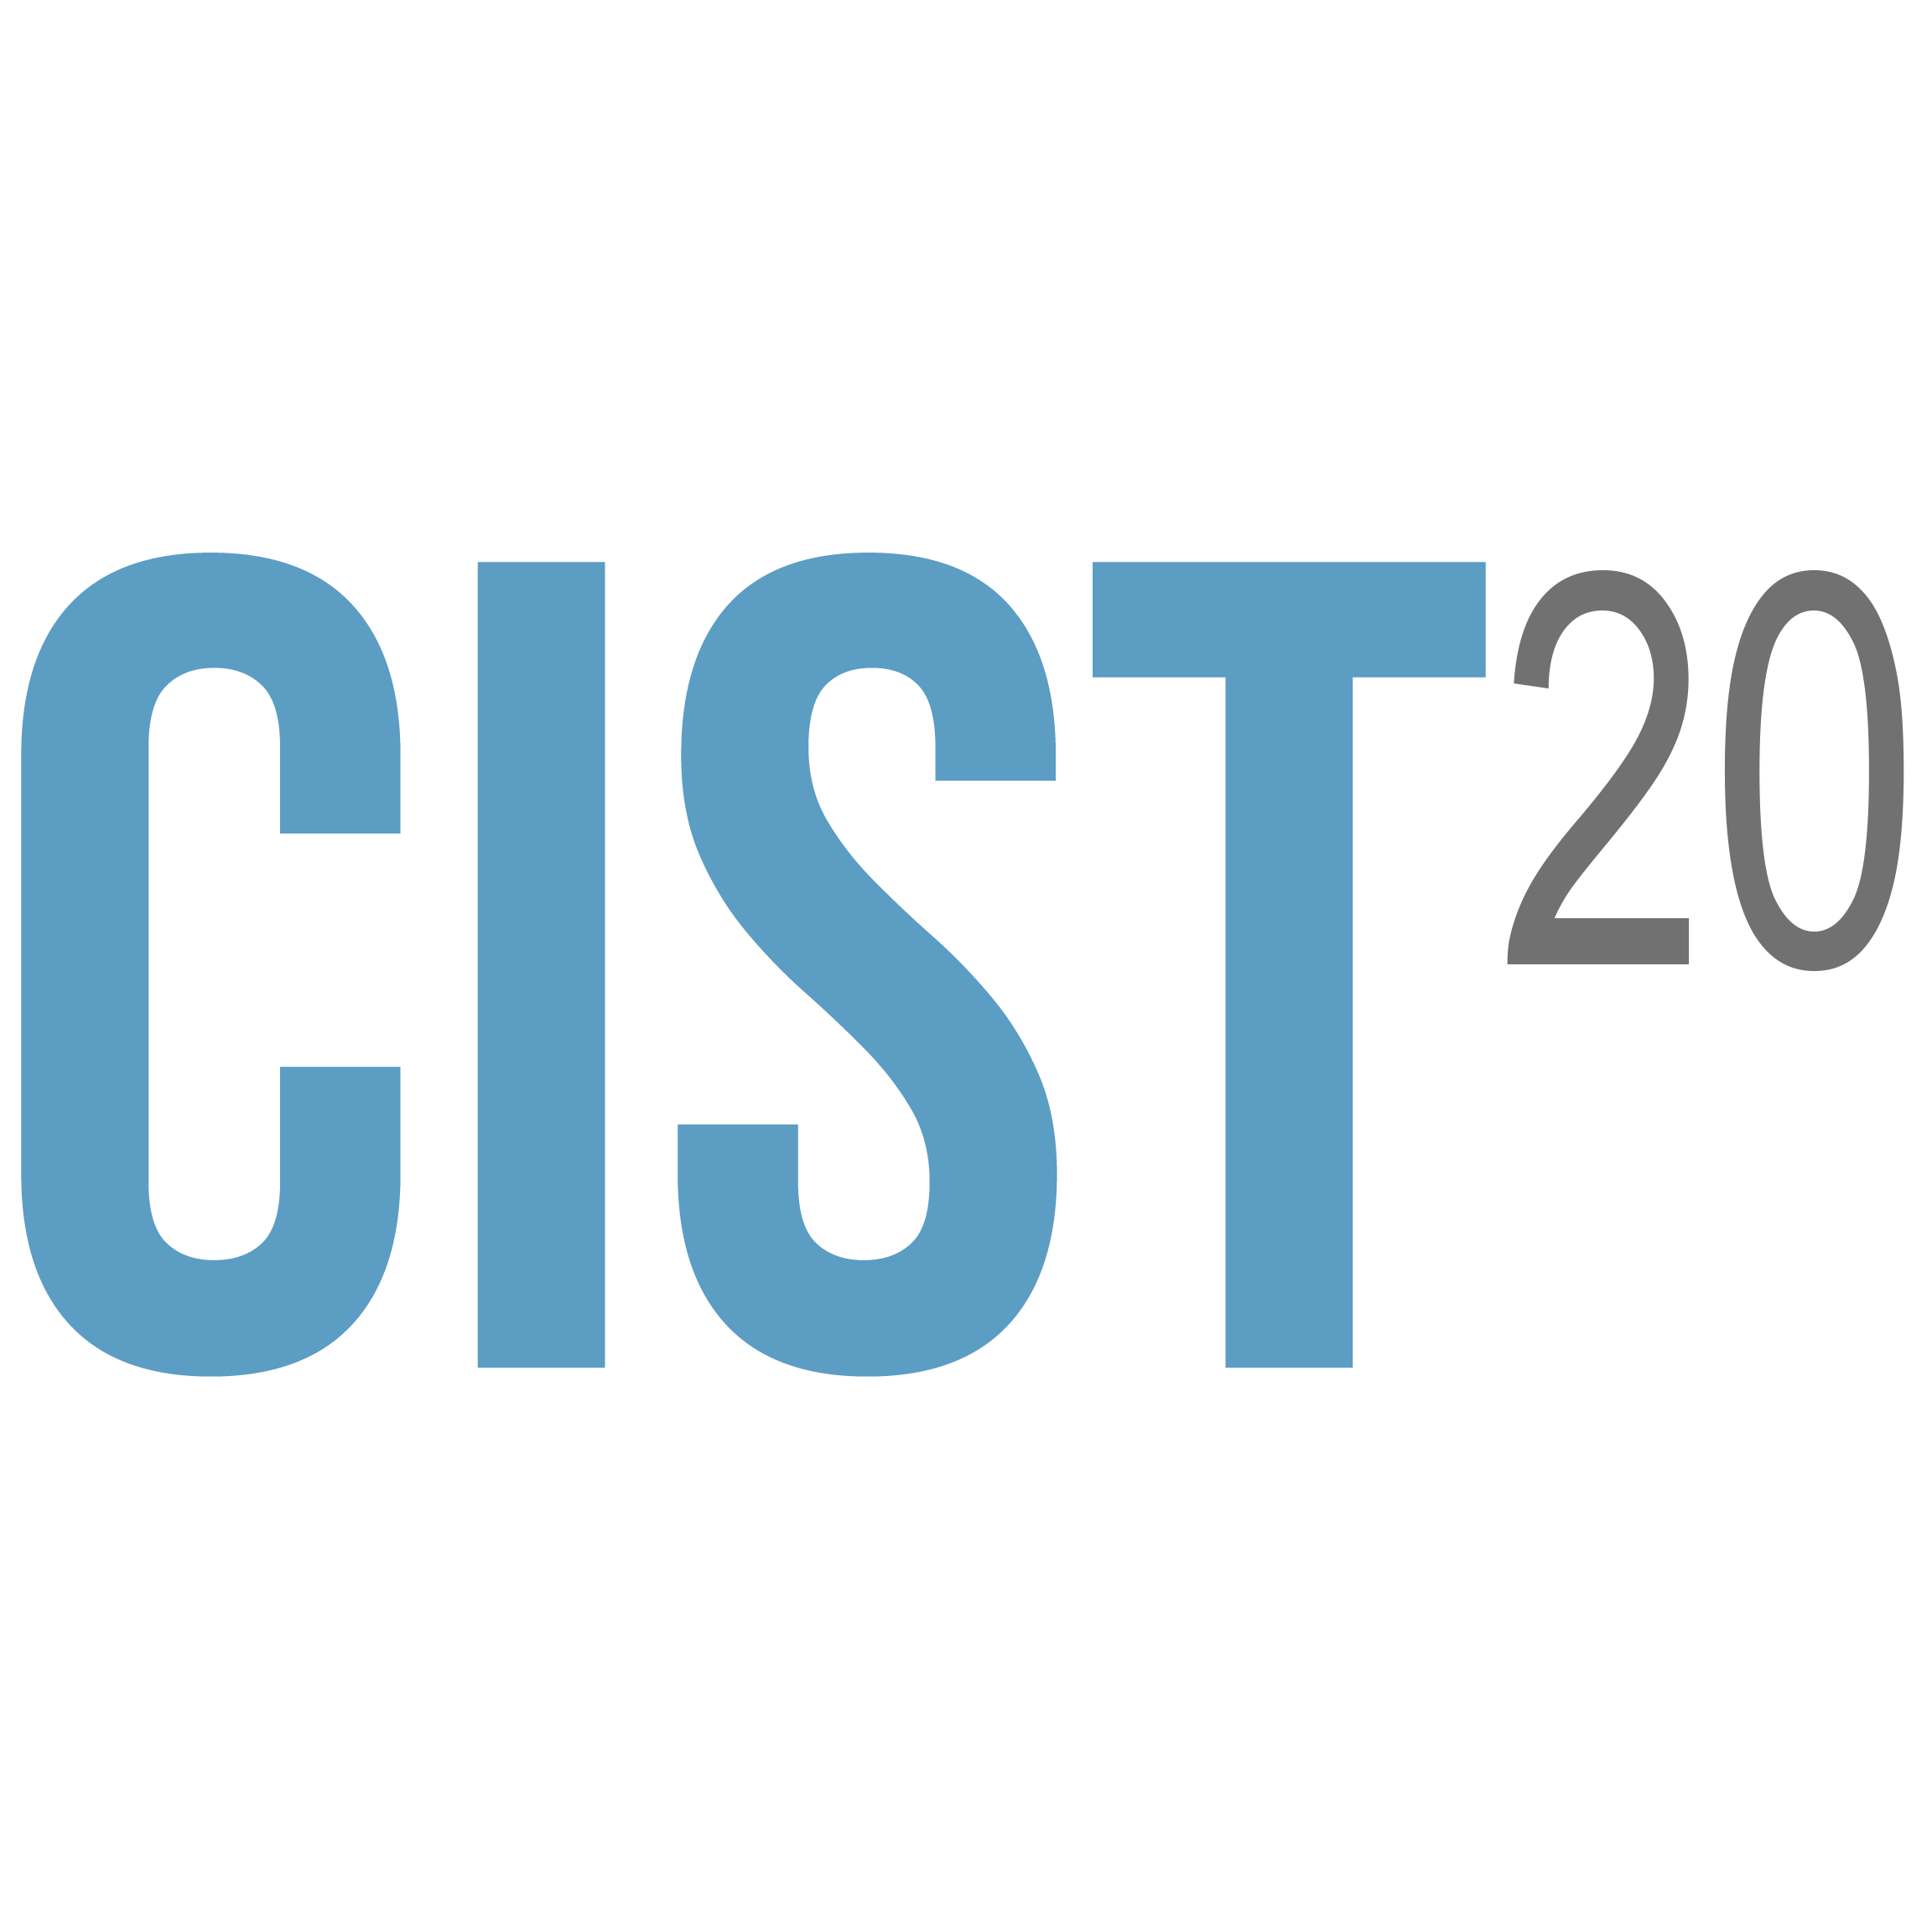 5th International Conference on Computer and Information Science and Technology (CIST’20)